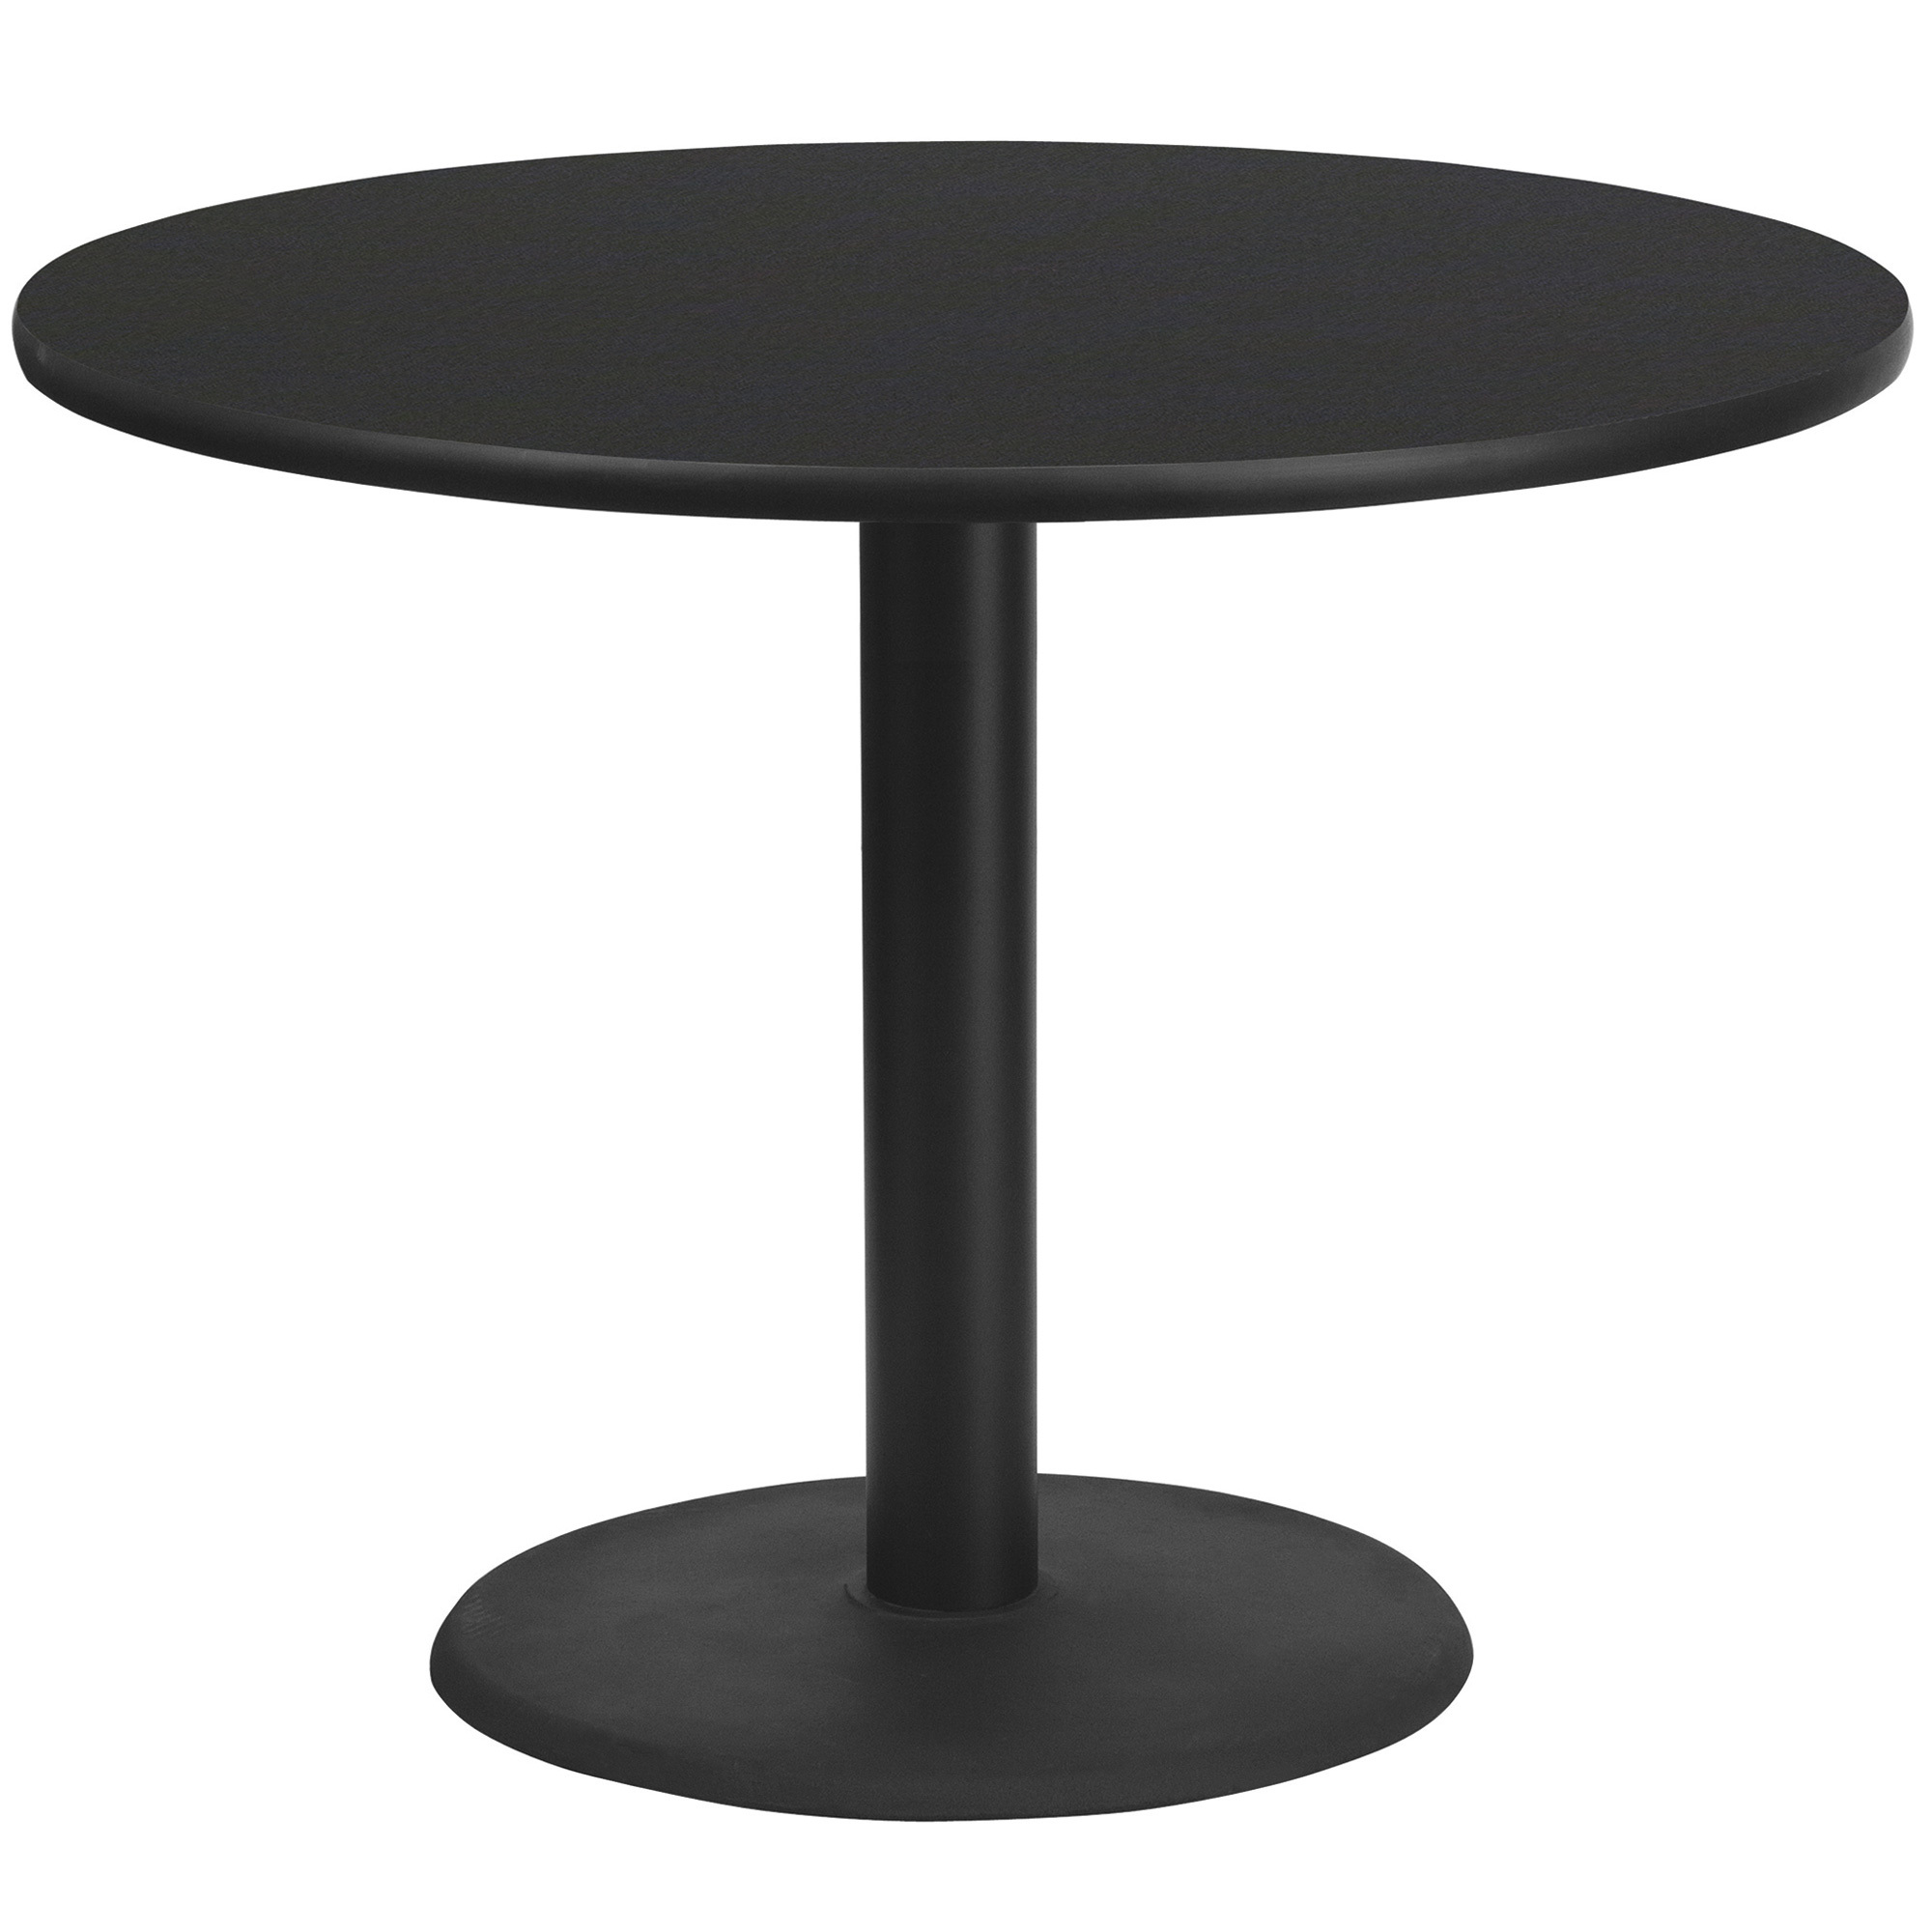 Flash Furniture 42Inch Round Table with Laminate Top and Round Base — Reversible Black/Mahogany Top, Model XUBK4242TR24 -  XURD42BKTR24